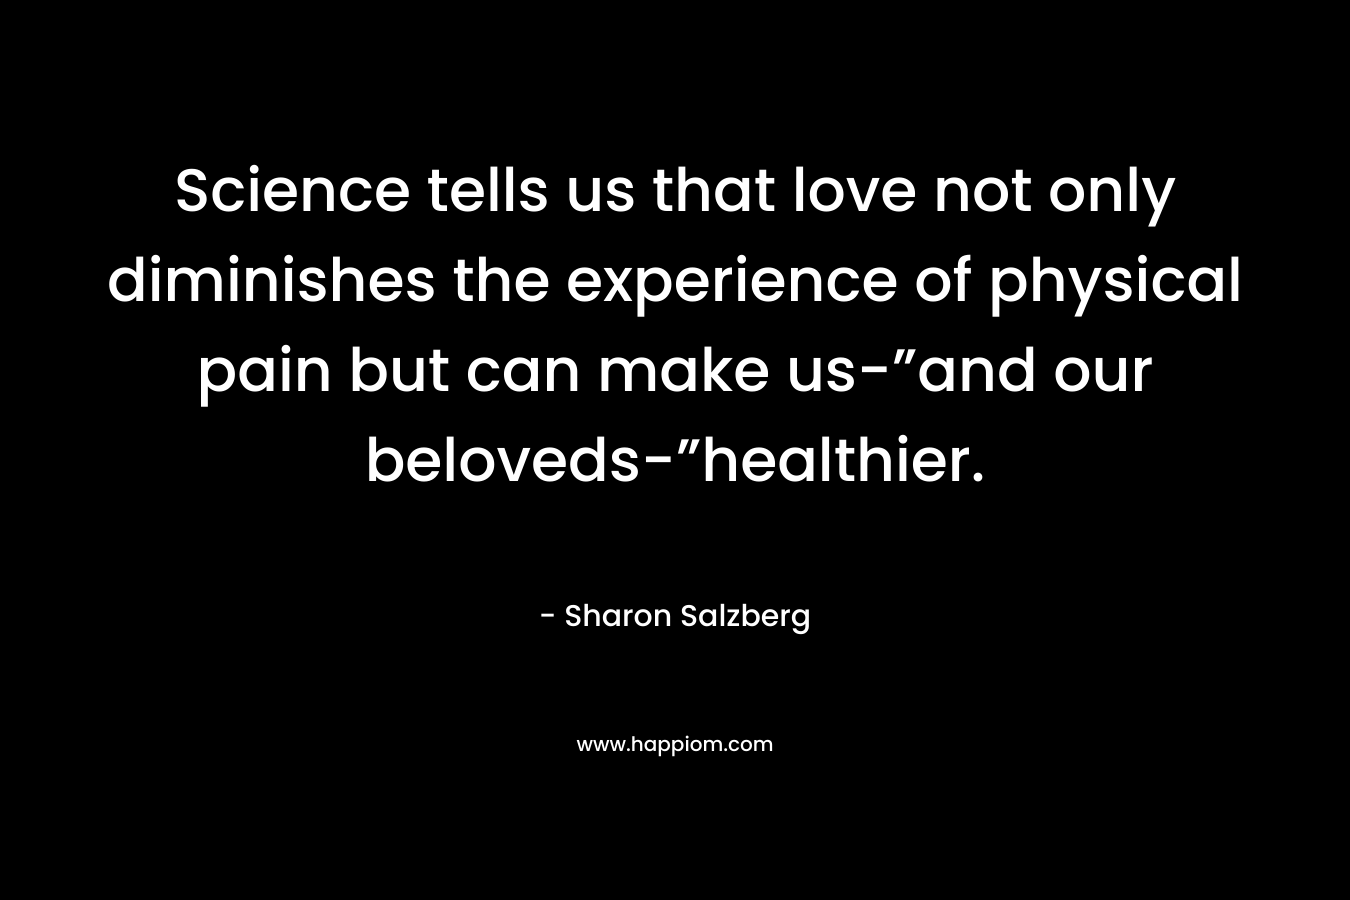 Science tells us that love not only diminishes the experience of physical pain but can make us-”and our beloveds-”healthier.